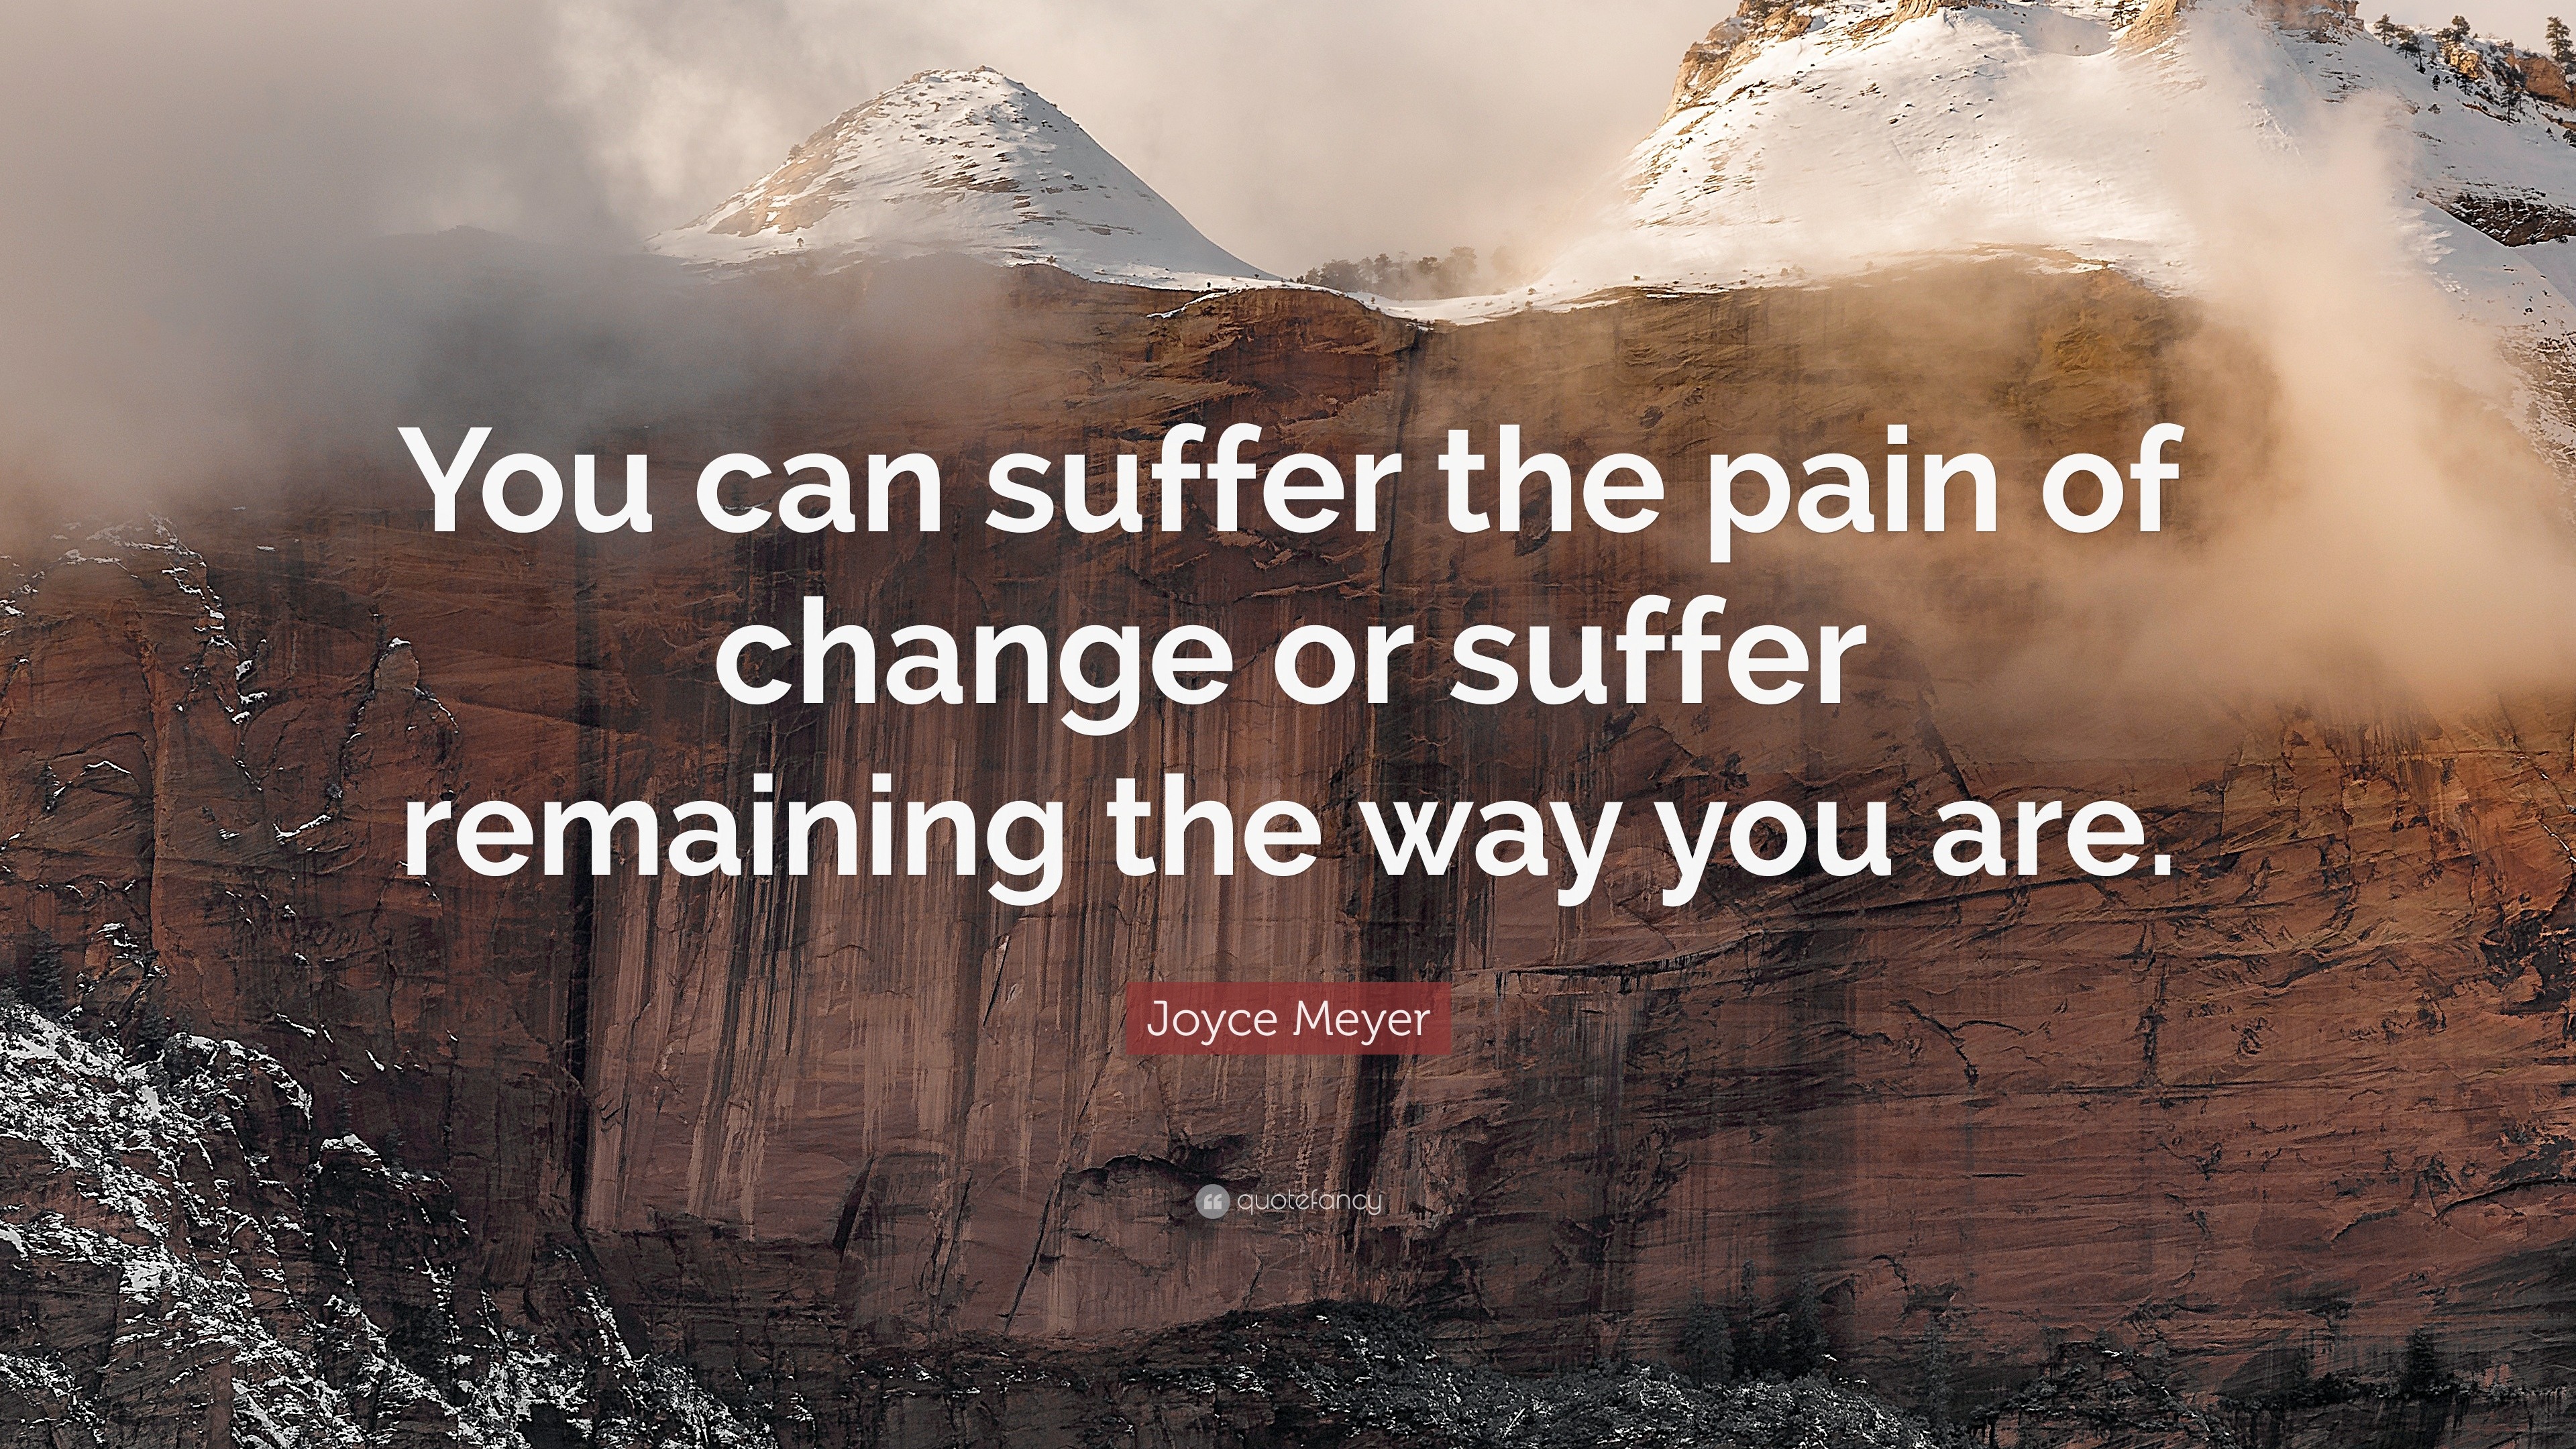 Joyce Meyer Quote: “You can suffer the pain of change or suffer